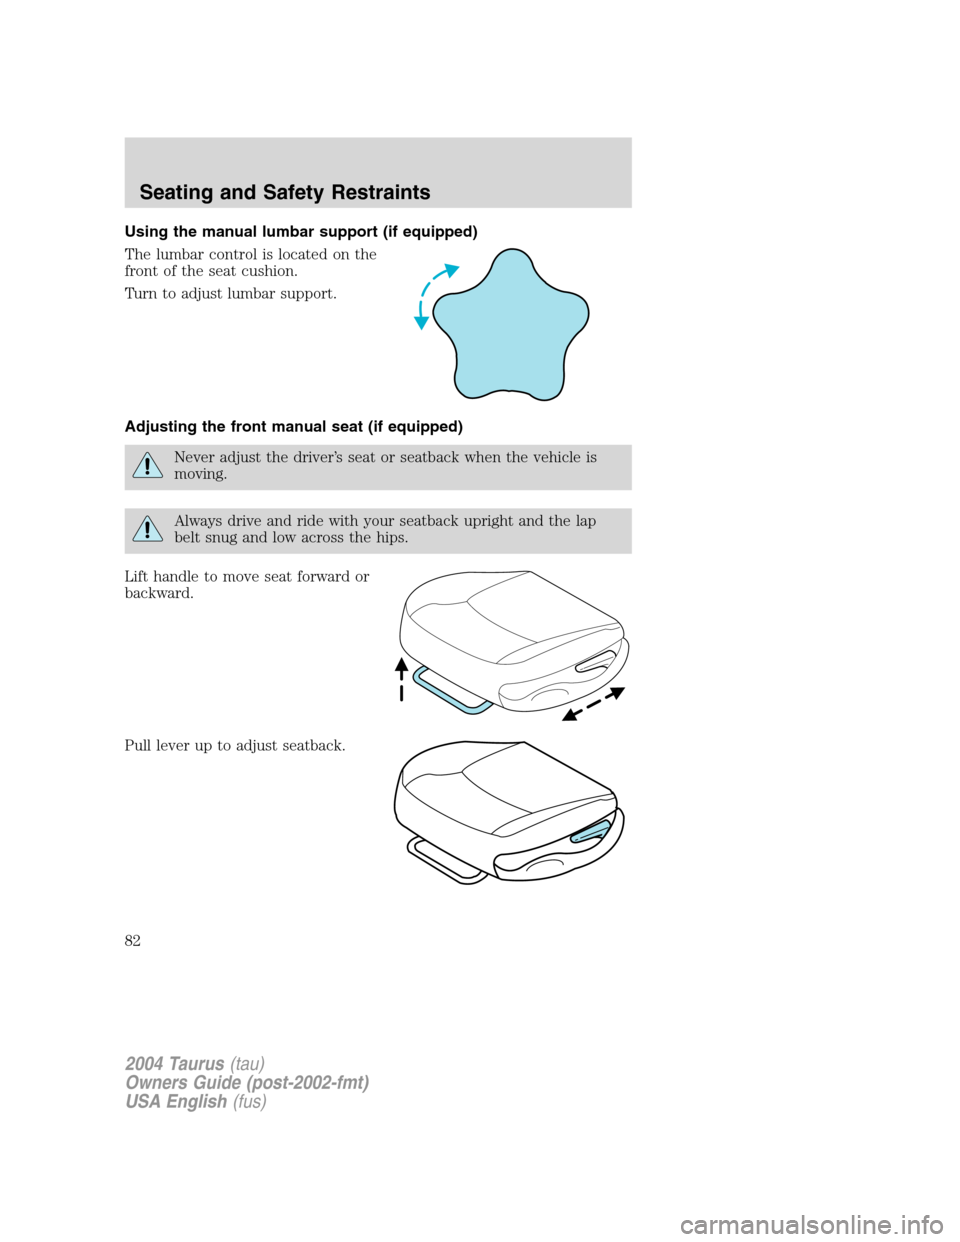 FORD TAURUS 2004 4.G Owners Manual Using the manual lumbar support (if equipped)
The lumbar control is located on the
front of the seat cushion.
Turn to adjust lumbar support.
Adjusting the front manual seat (if equipped)
Never adjust 